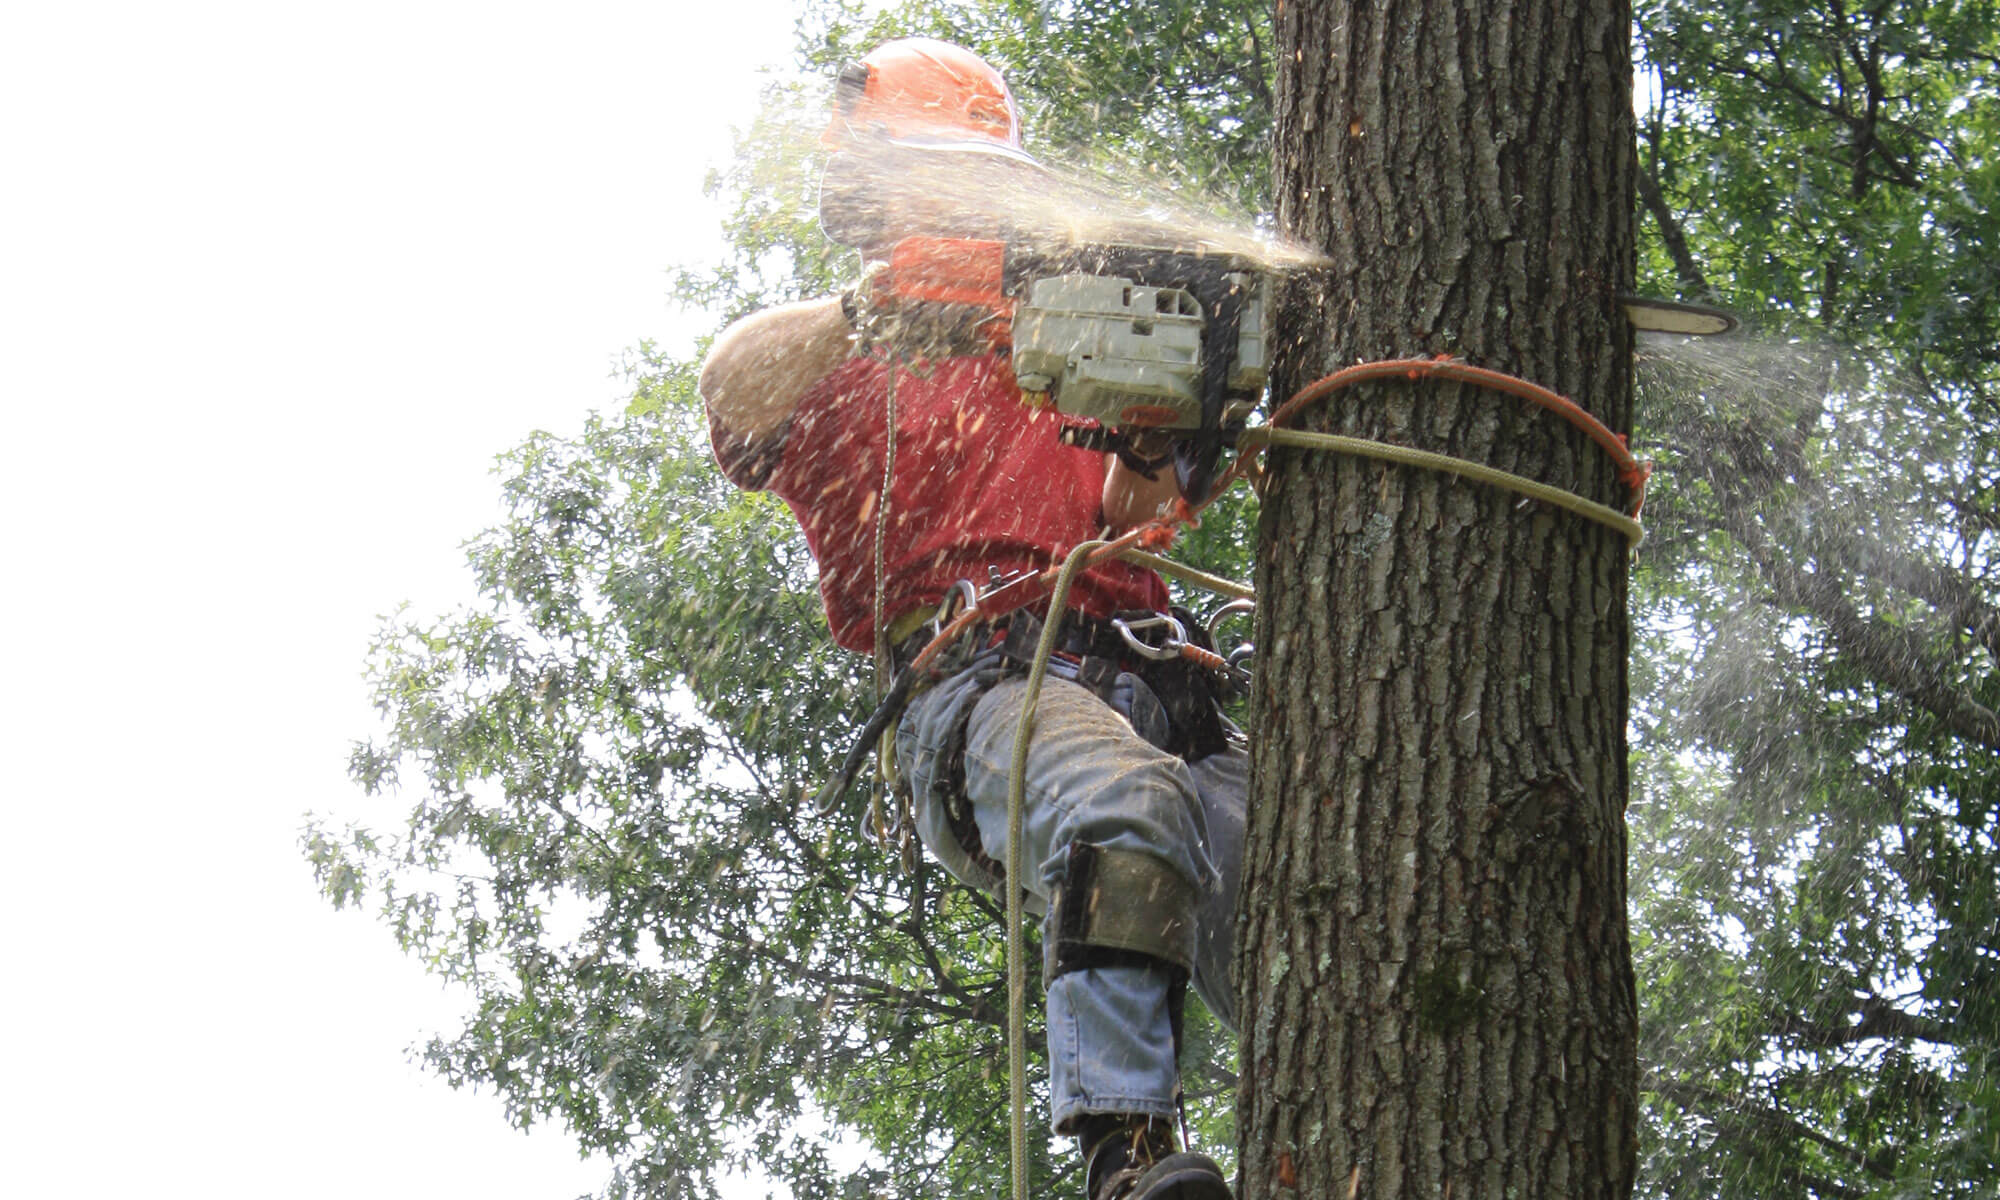 Jupiter-Tequesta Tree Trimming and Tree Removal Services Main Header-We Offer Tree Trimming Services, Tree Removal, Tree Pruning, Tree Cutting, Residential and Commercial Tree Trimming Services, Storm Damage, Emergency Tree Removal, Land Clearing, Tree Companies, Tree Care Service, Stump Grinding, and we're the Best Tree Trimming Company Near You Guaranteed!